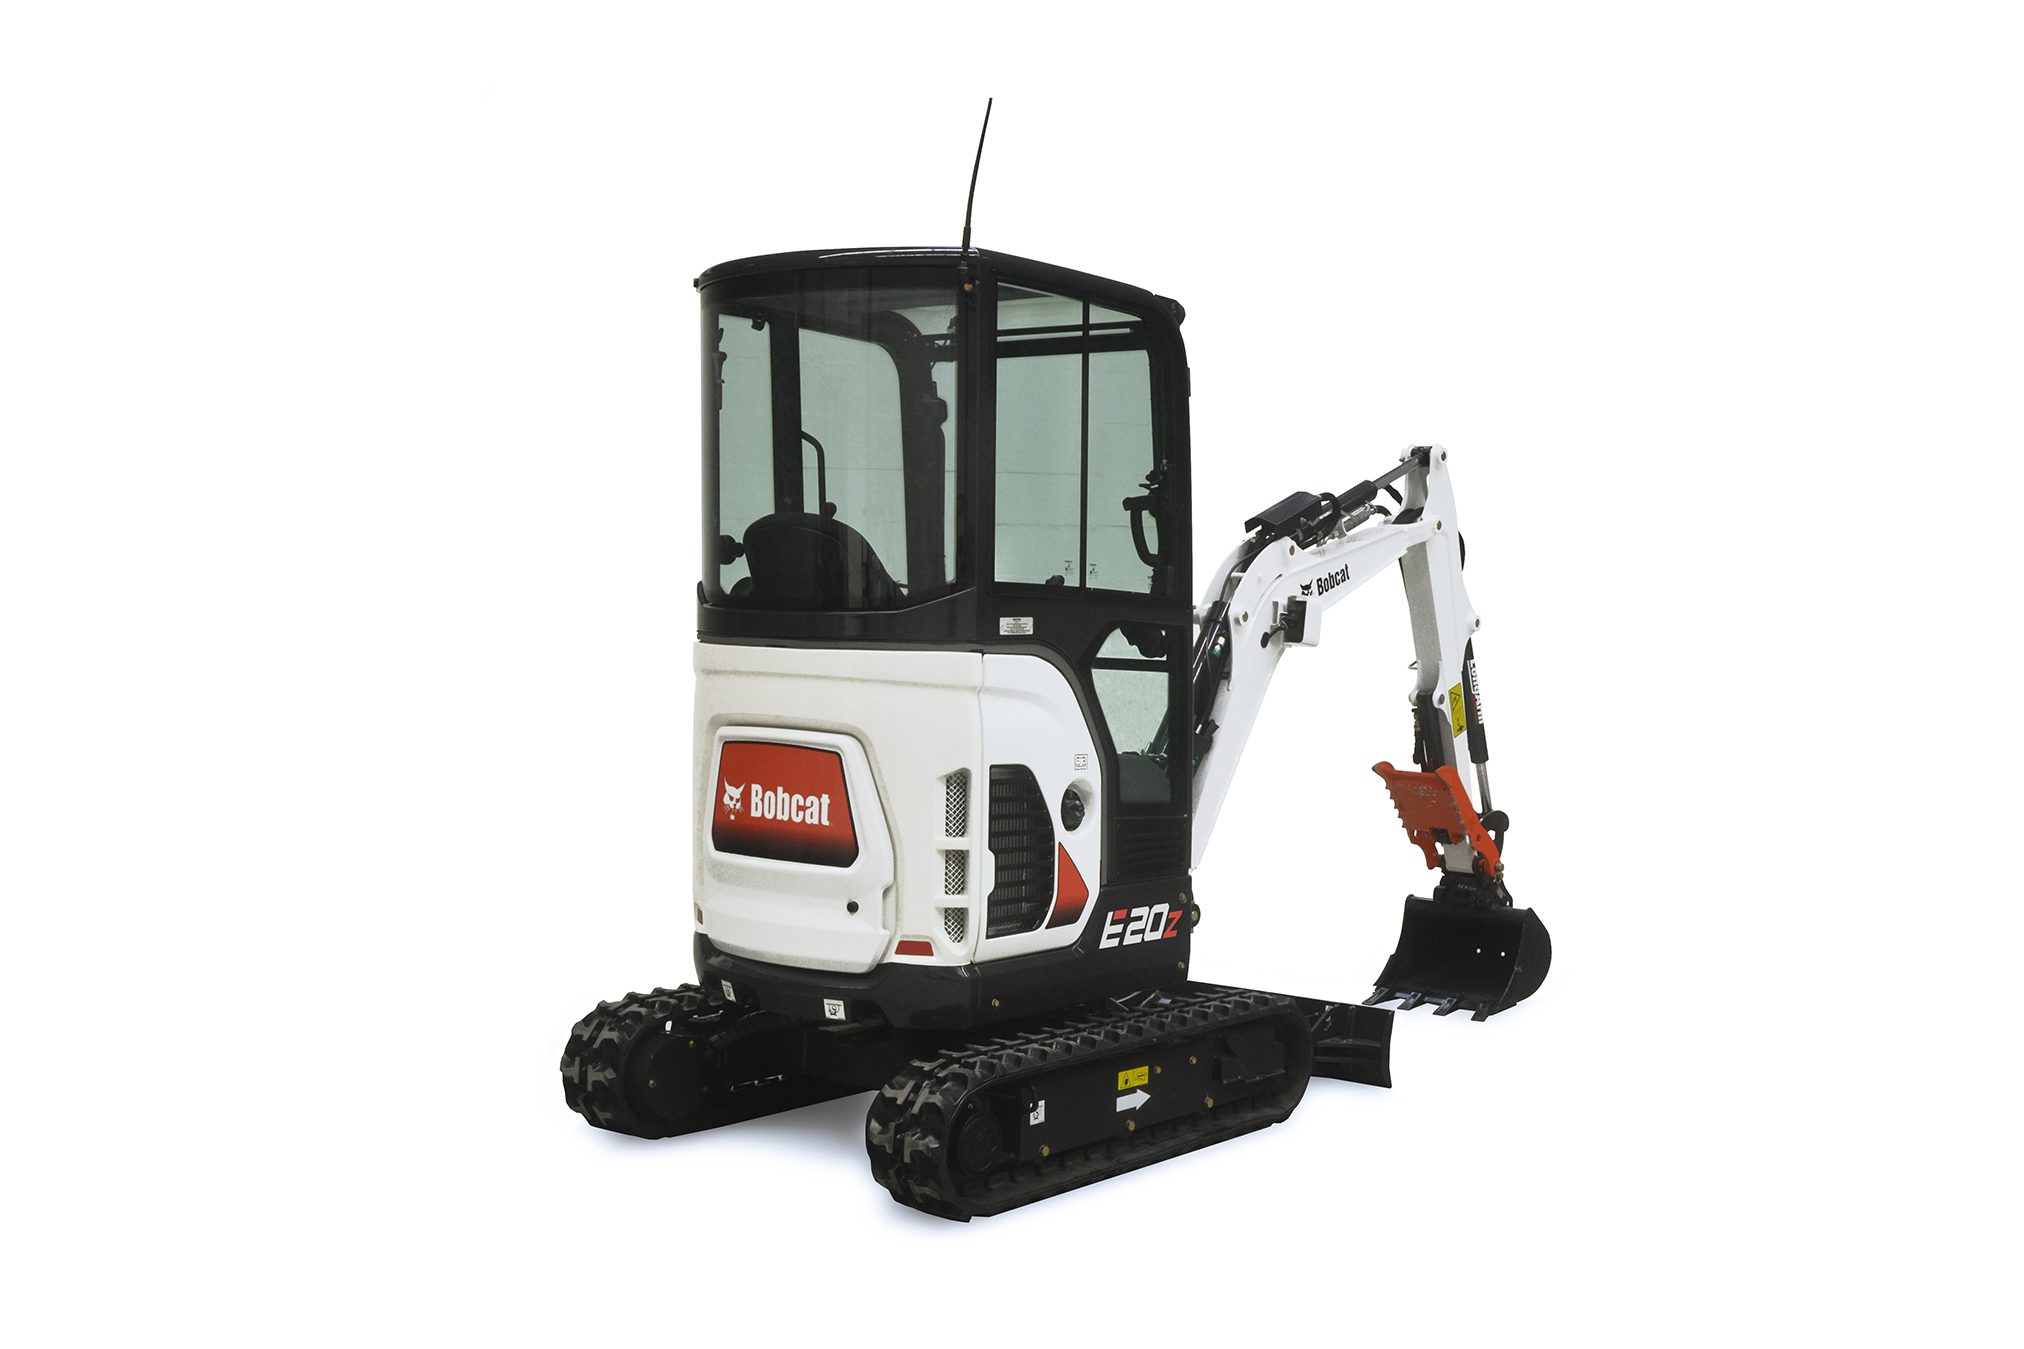 Browse Specs and more for the E20 Compact Excavator - Bobcat of the Rockies